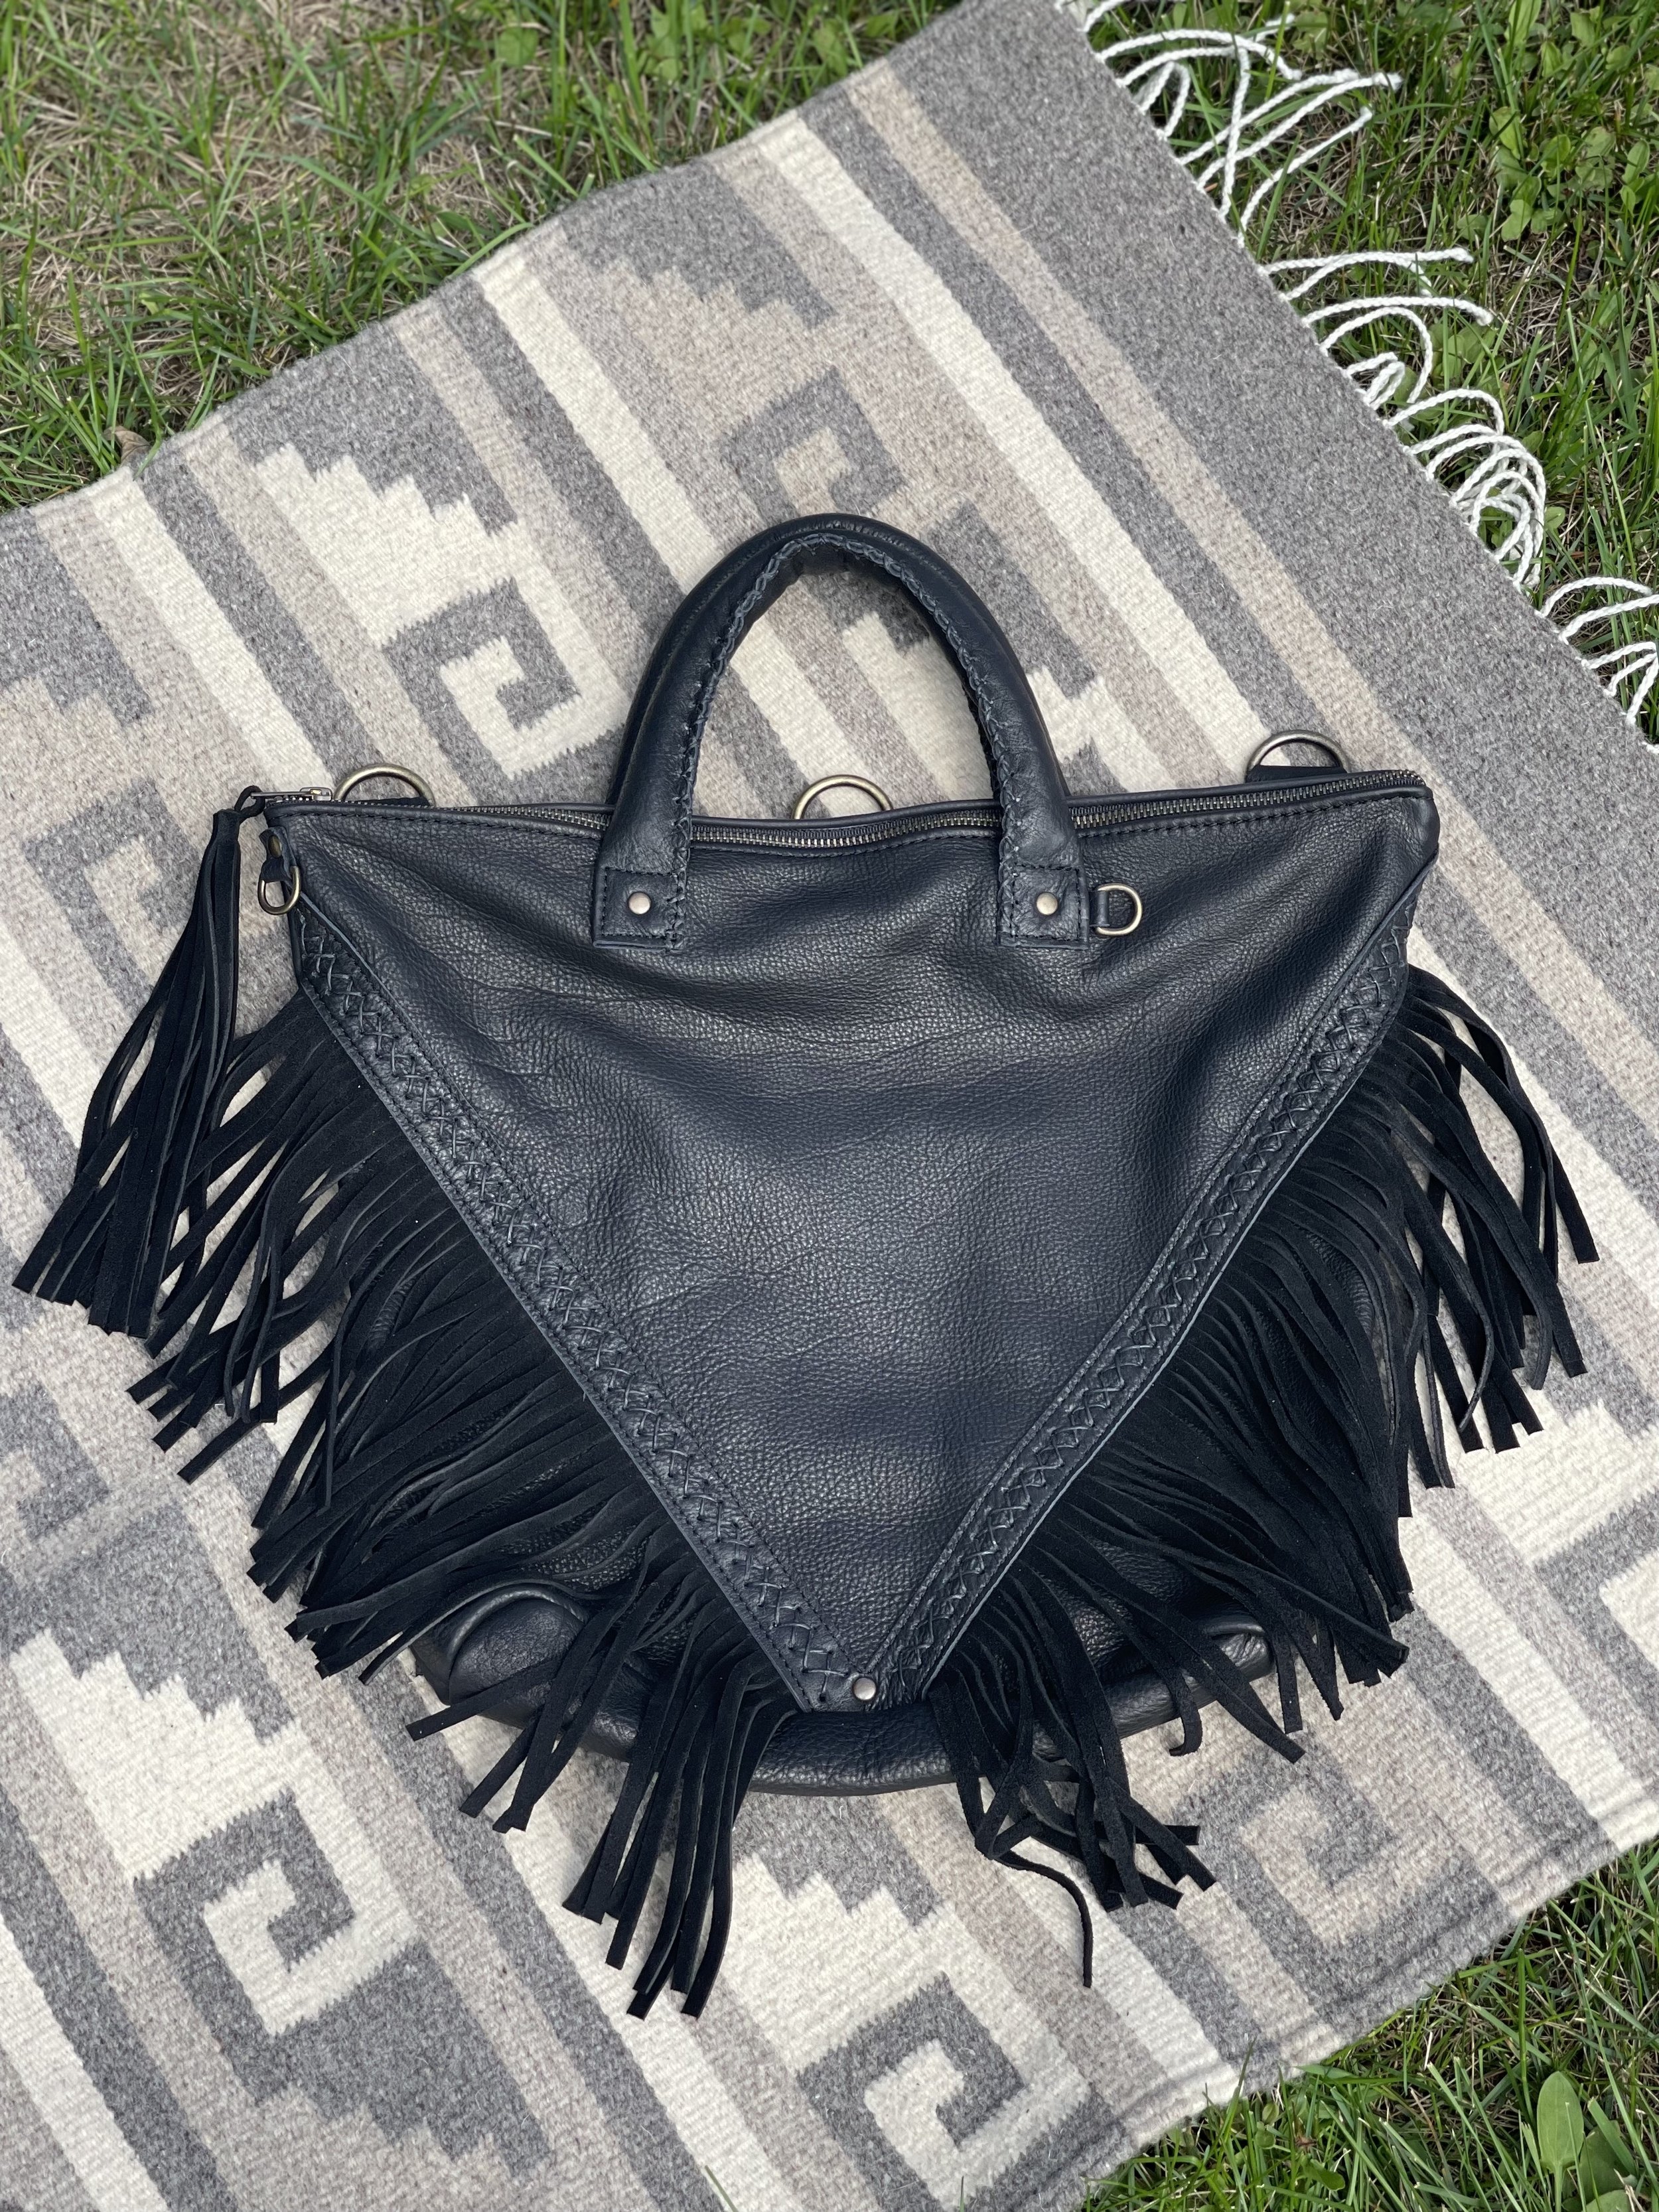 Julia J Convertible Bag with 2 Permanent Puffy Handles - black bison leather, black suede fringe, black criss cross hand-stitching, Flair D-Rings